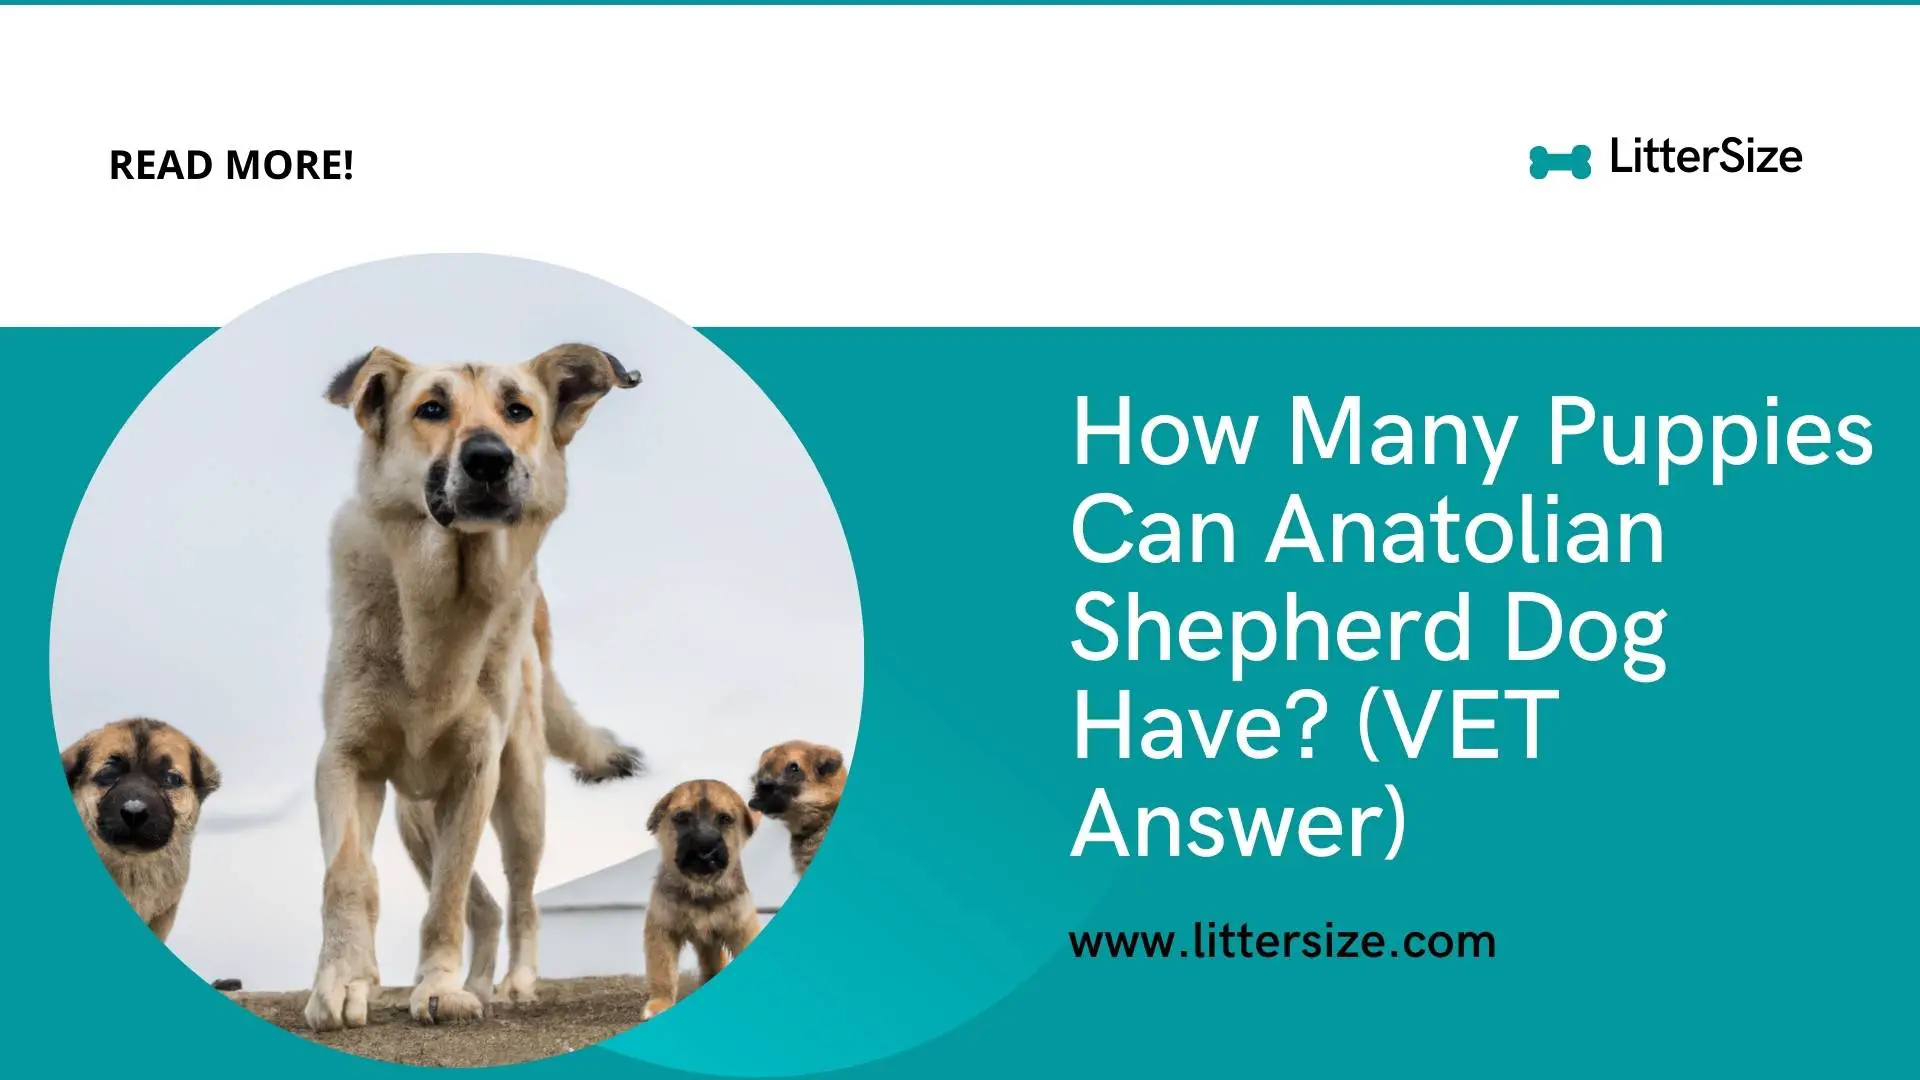 How Many Puppies Can Anatolian Shepherd Dog Have? (VET Answer)